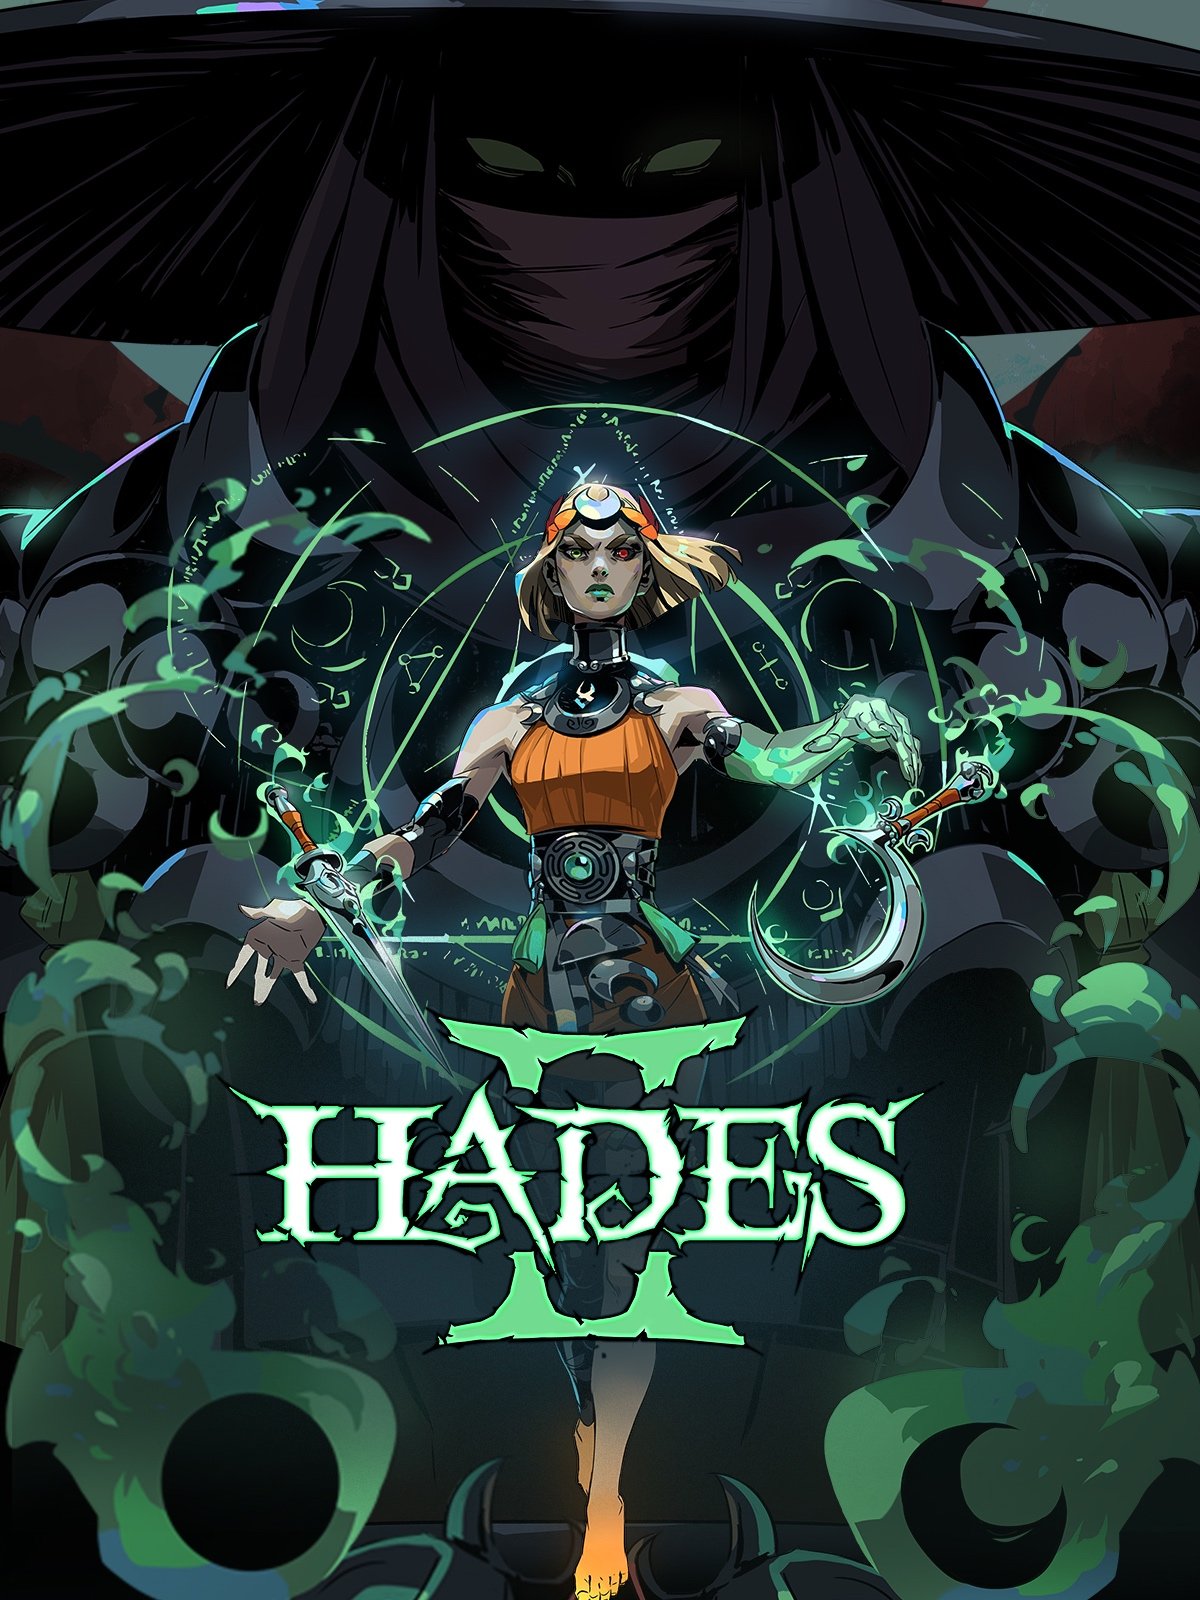 I am happy to say that HADES is now available on #Playstation and